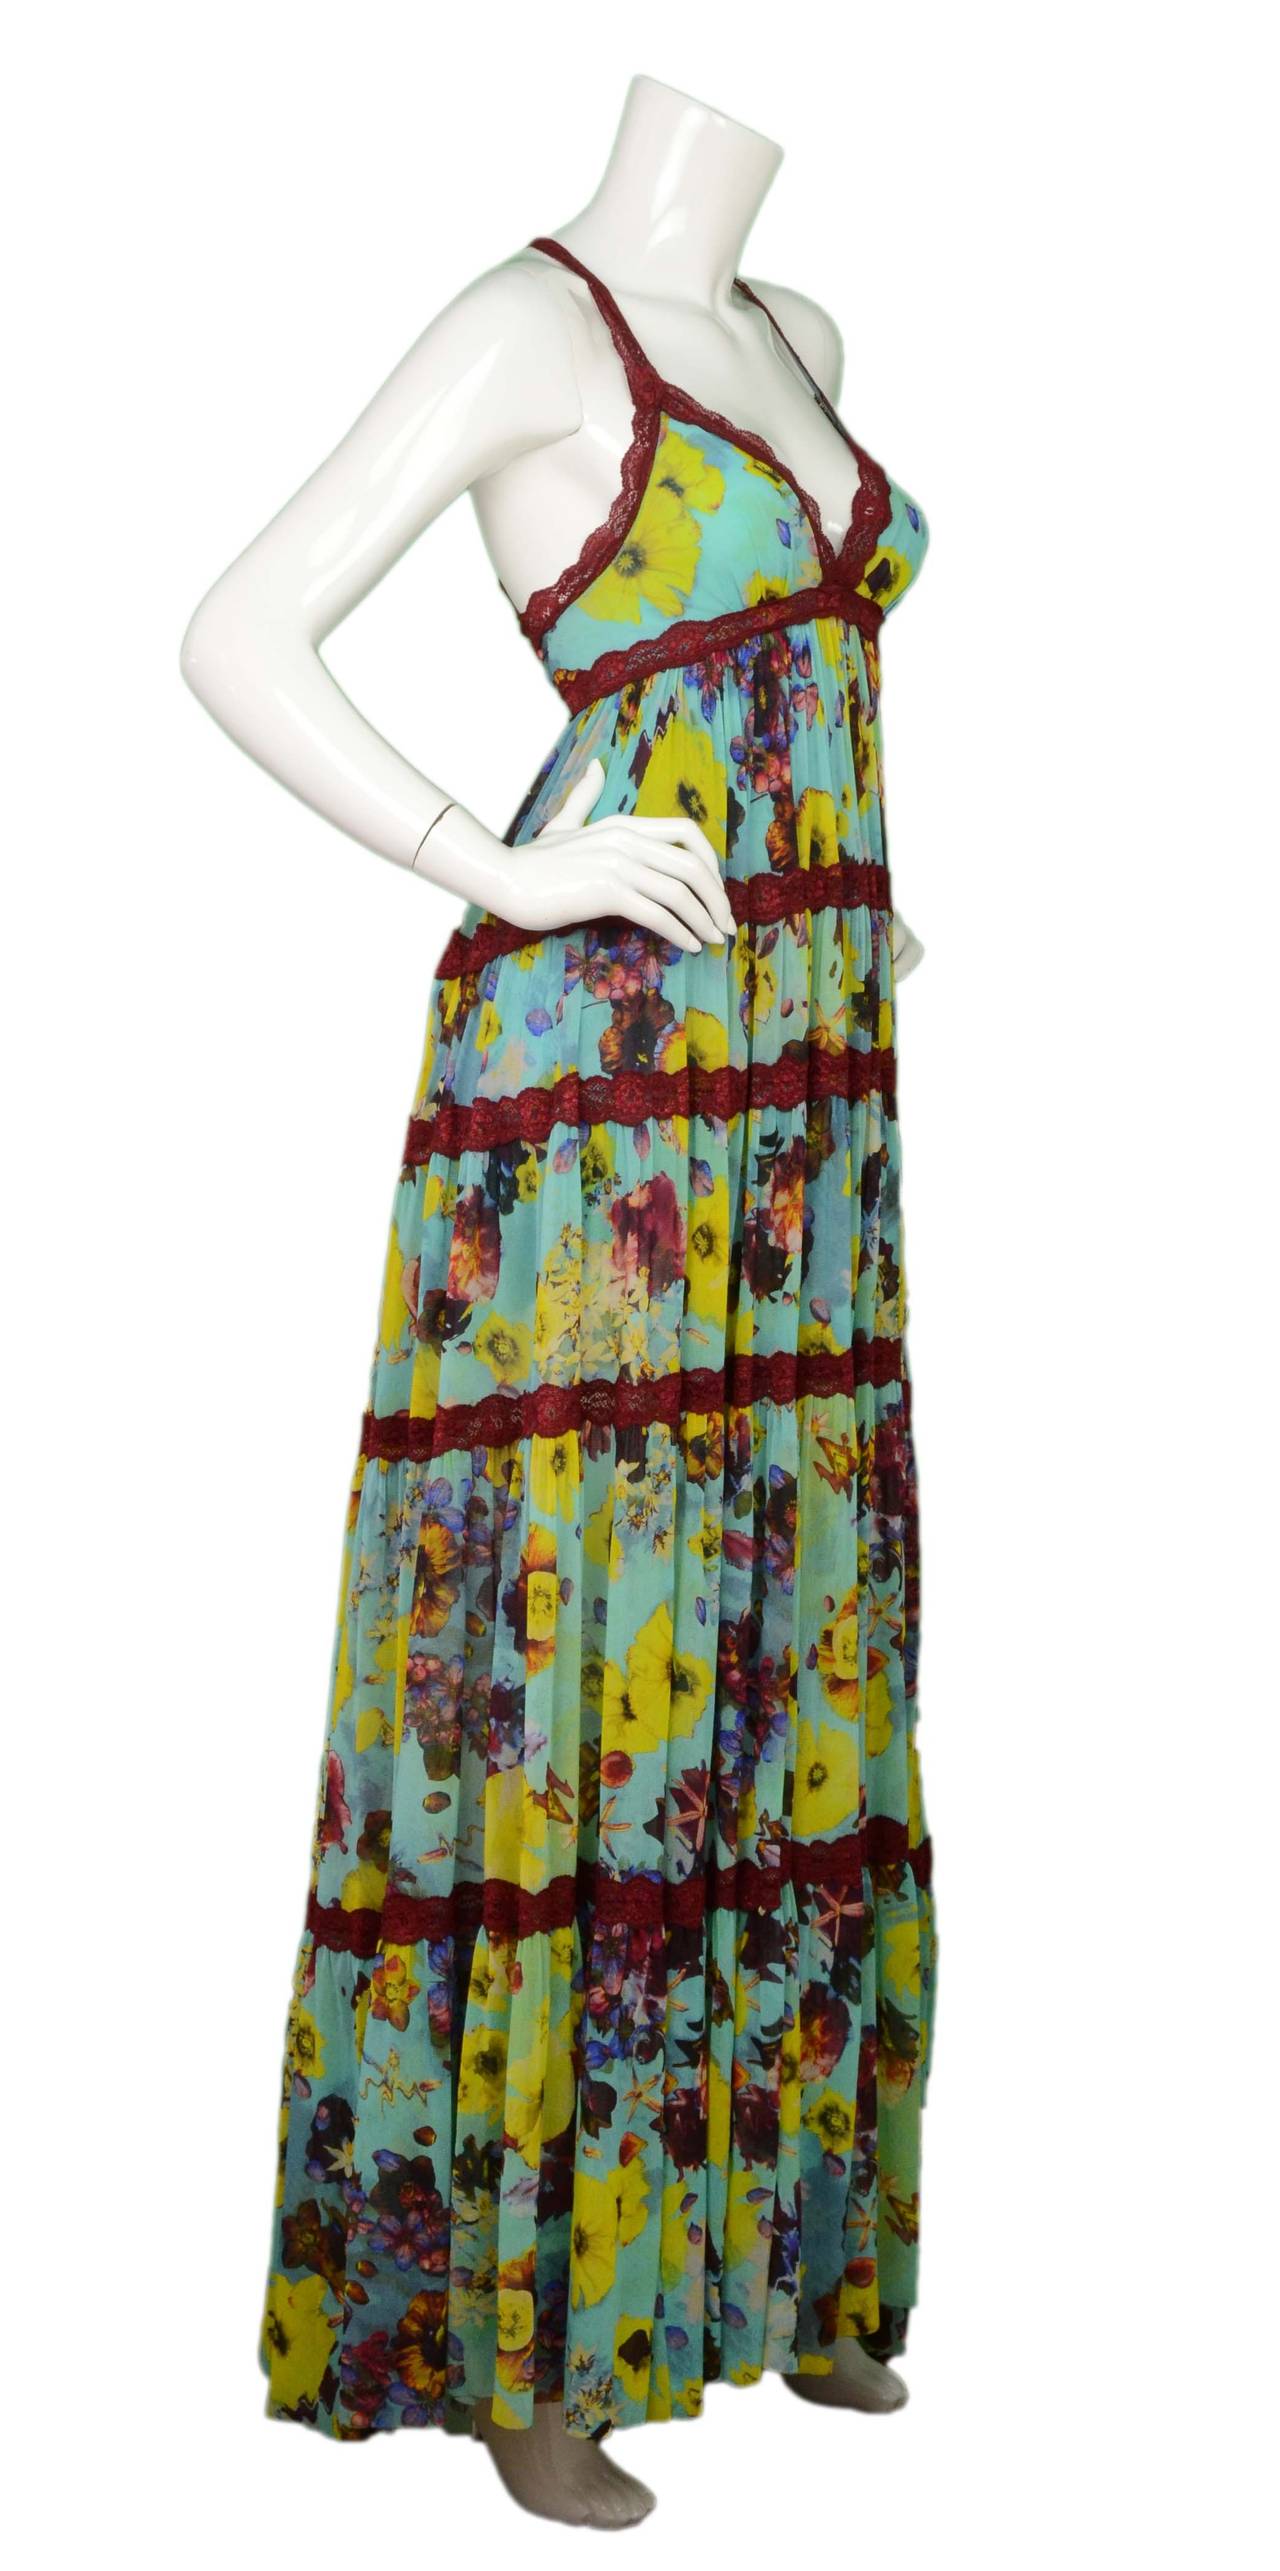 Jean Paul Gaultier Teal Floral Print Maxi Dress 
Features burgundy lace trim throughout
Made In: Italy
Color: Teal, yellow, burgundy and blue
Composition: 100% nylon
Lining: None
Closure/Opening: Pull over
Exterior Pockets: None
Interior